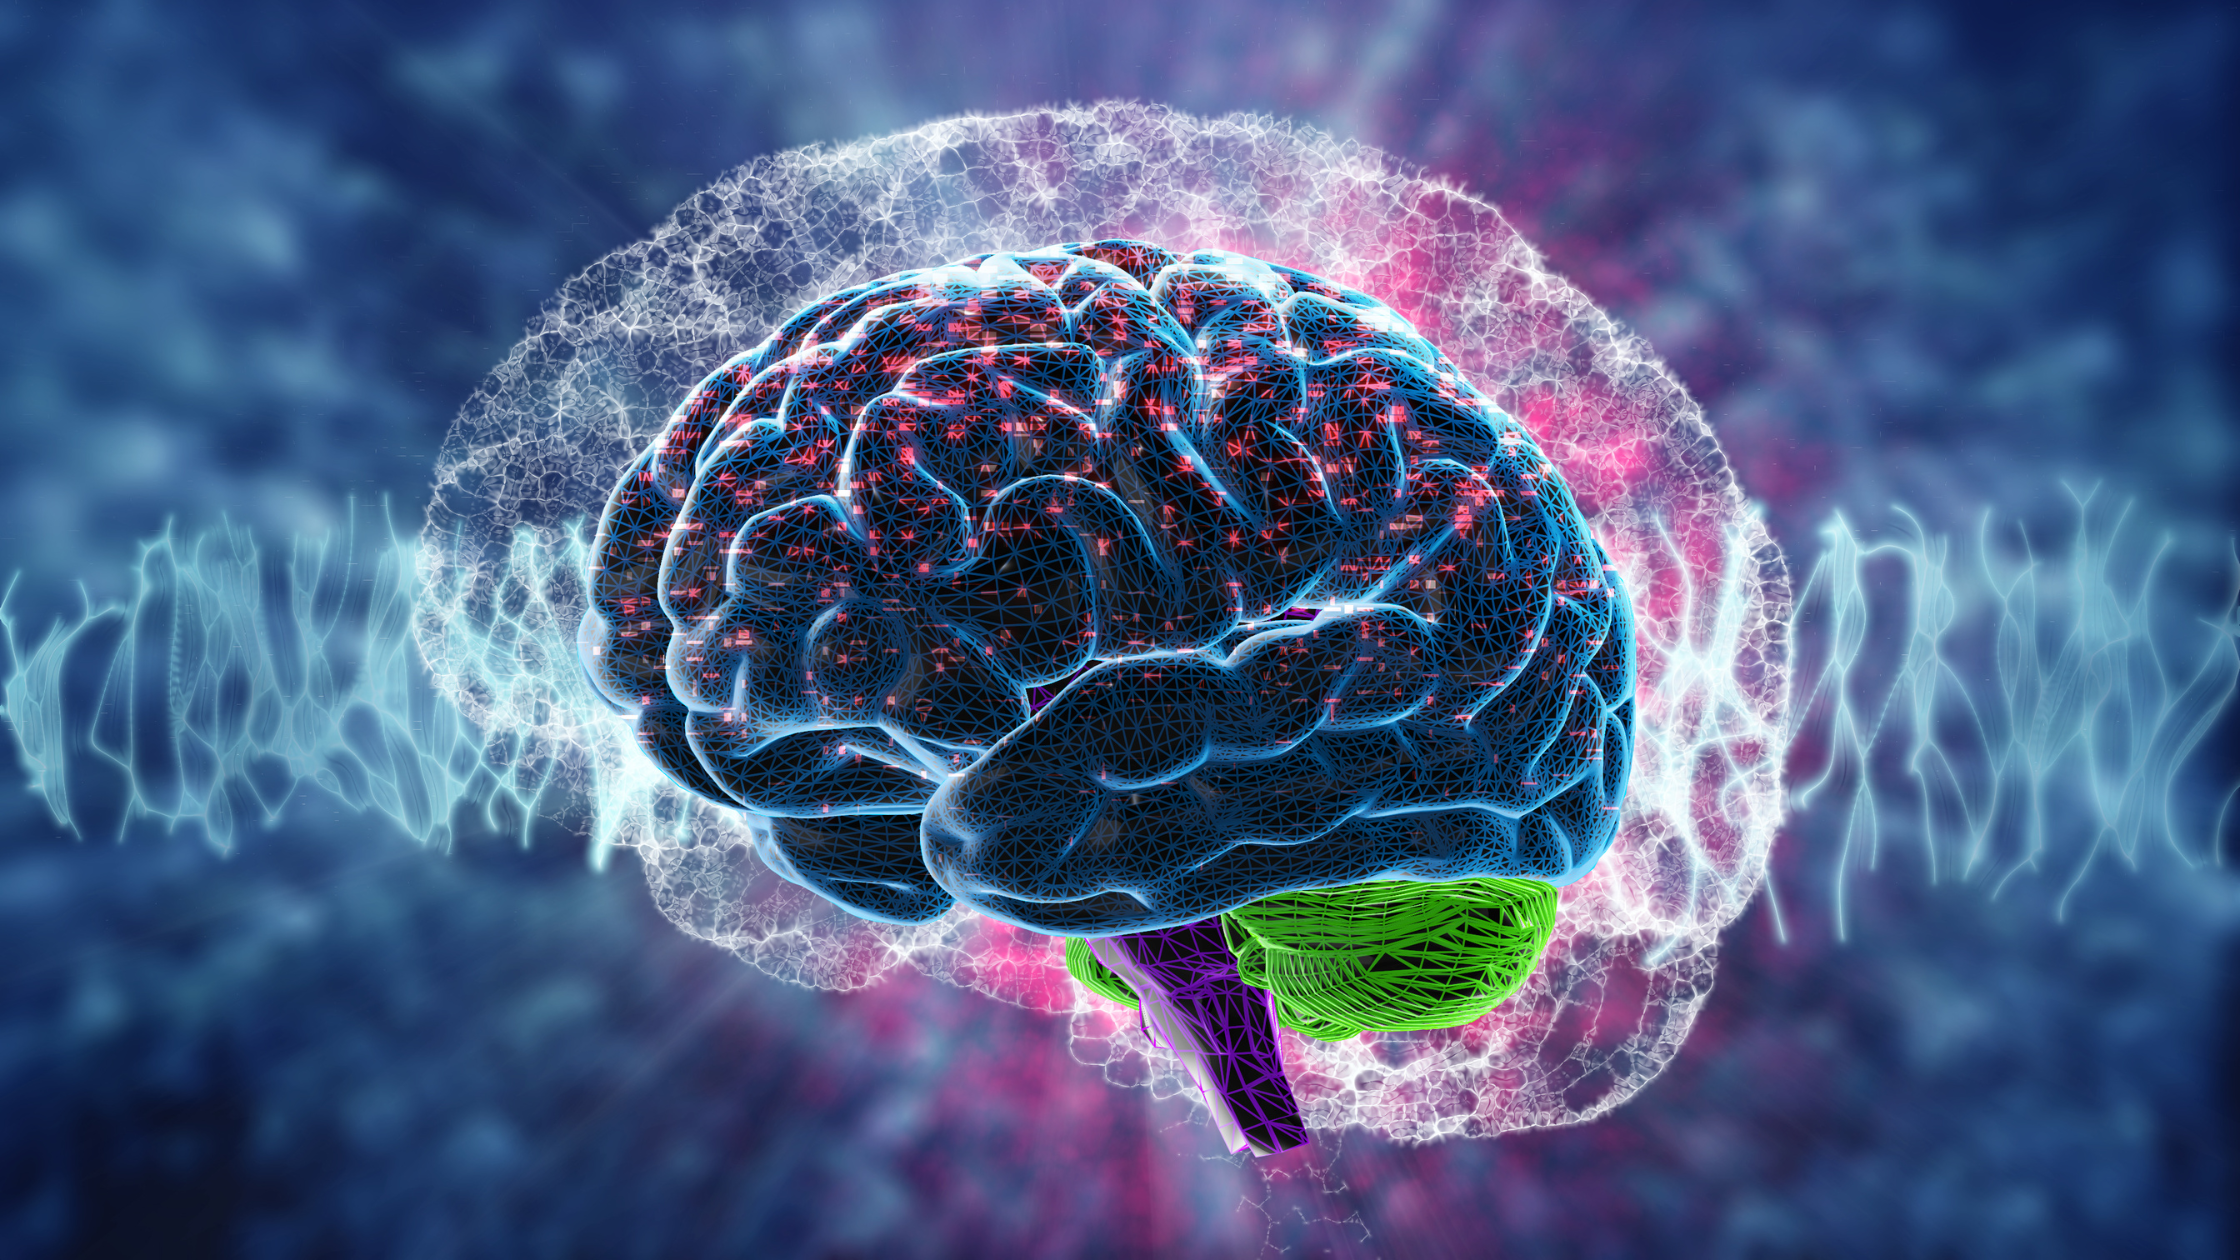 human brain rendered in deep blue with pink, green and purple glowing "neurons," etc